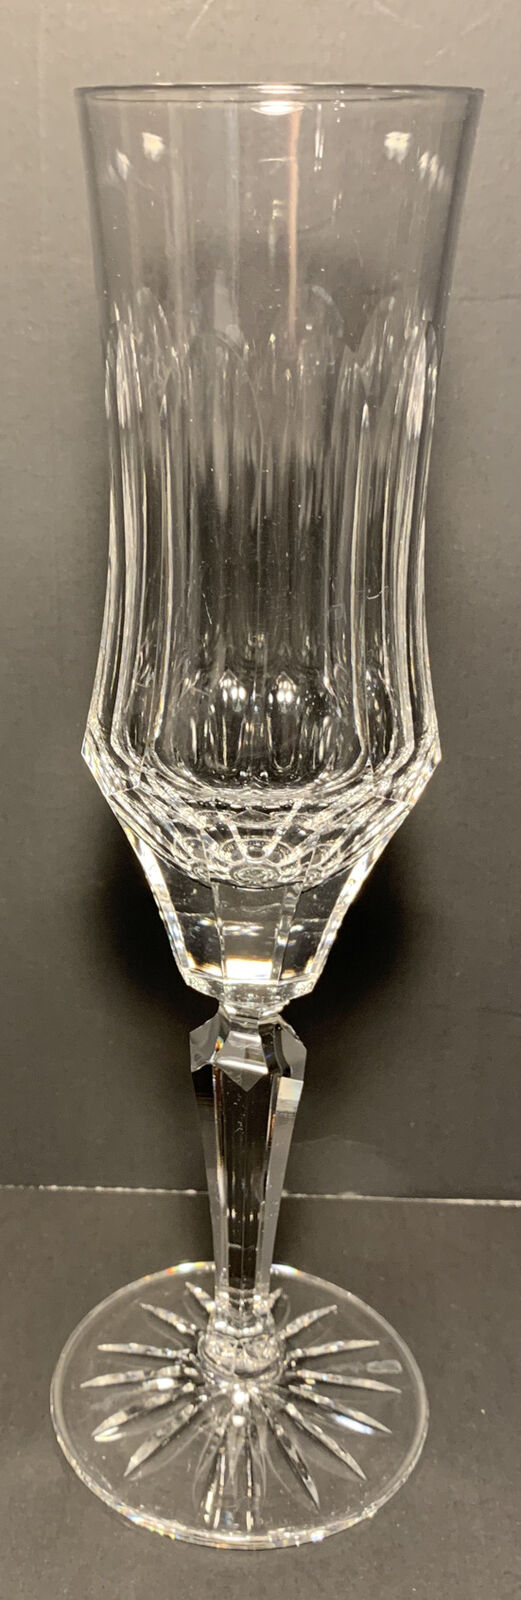 Galway Crystal Old Galway Pattern ( Star Cut Foot) Champagne Flute